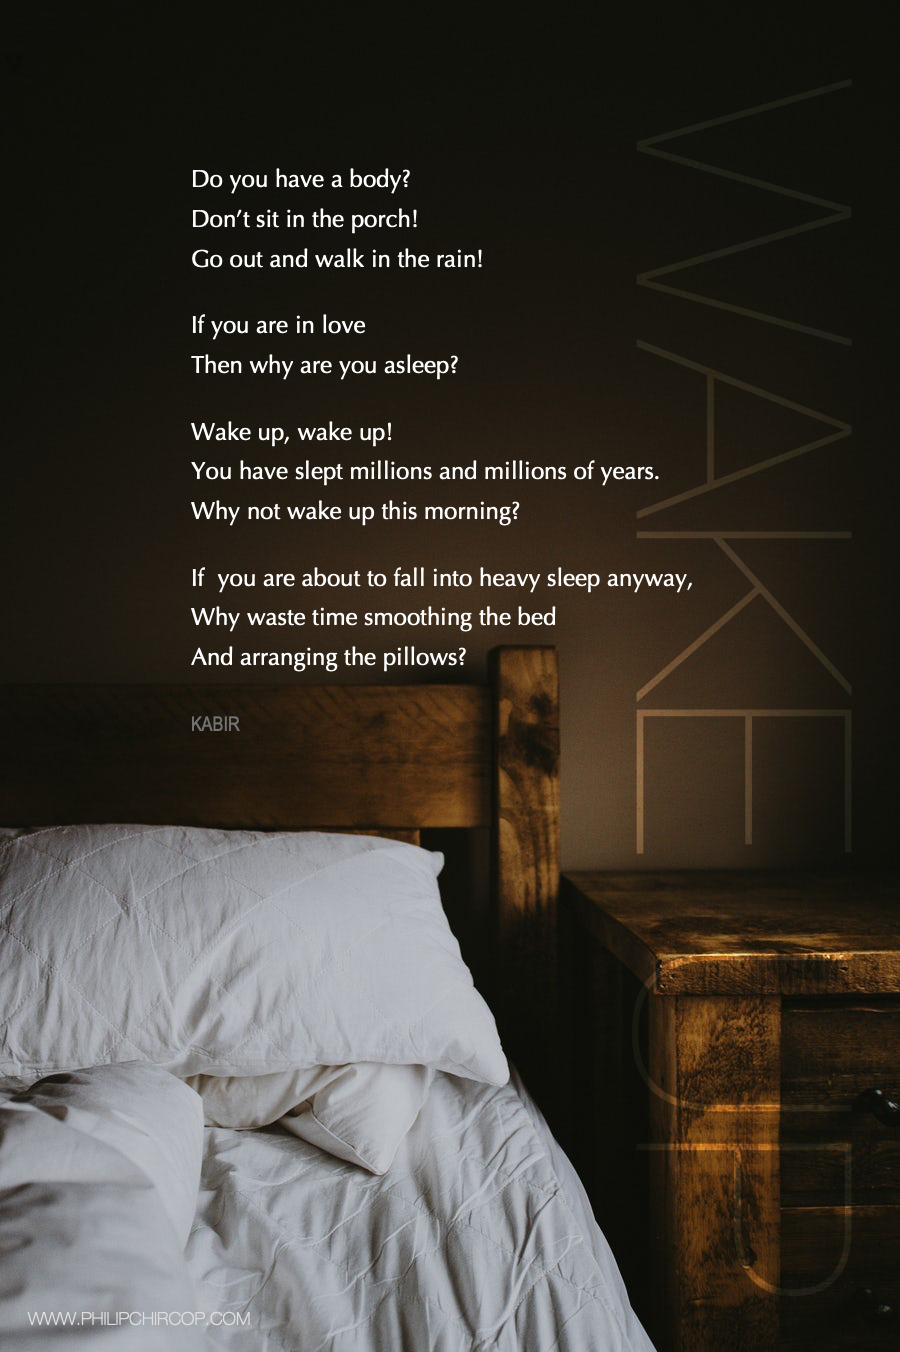 Wake up poem for girlfriend